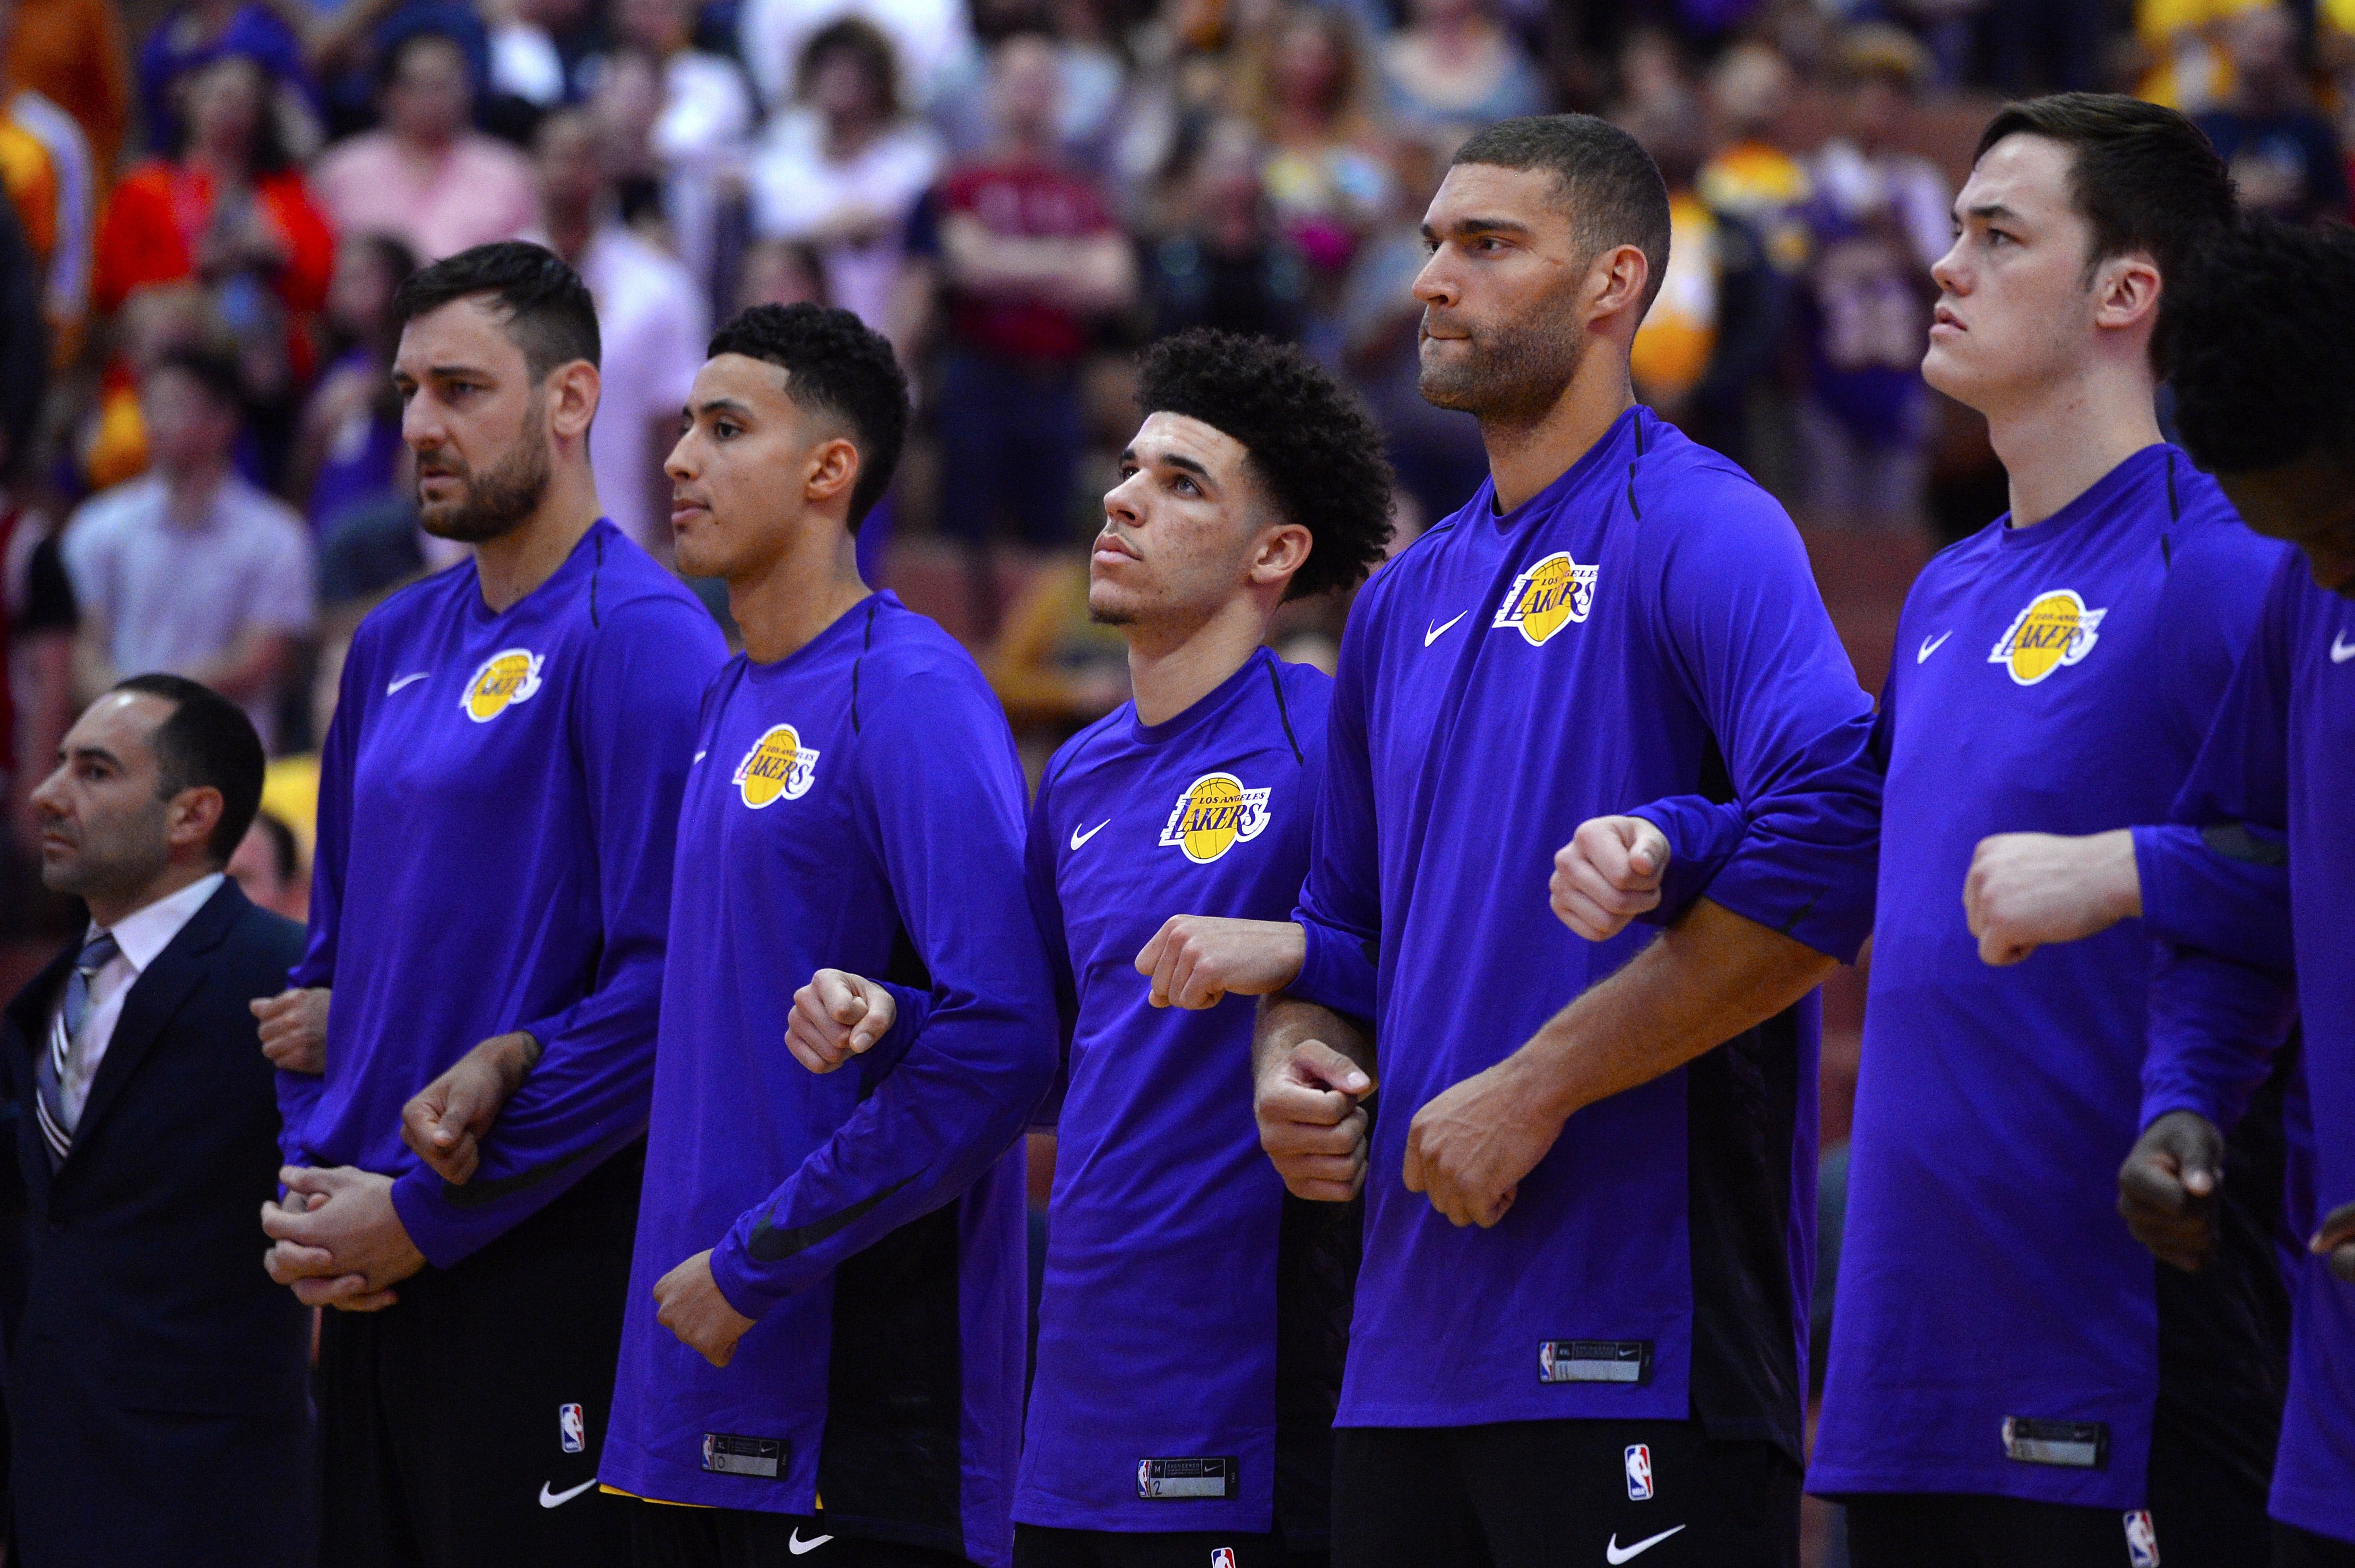 NBA Commissioner: 'My Expectation Is That Our Players Will Stand For The National Anthem'
